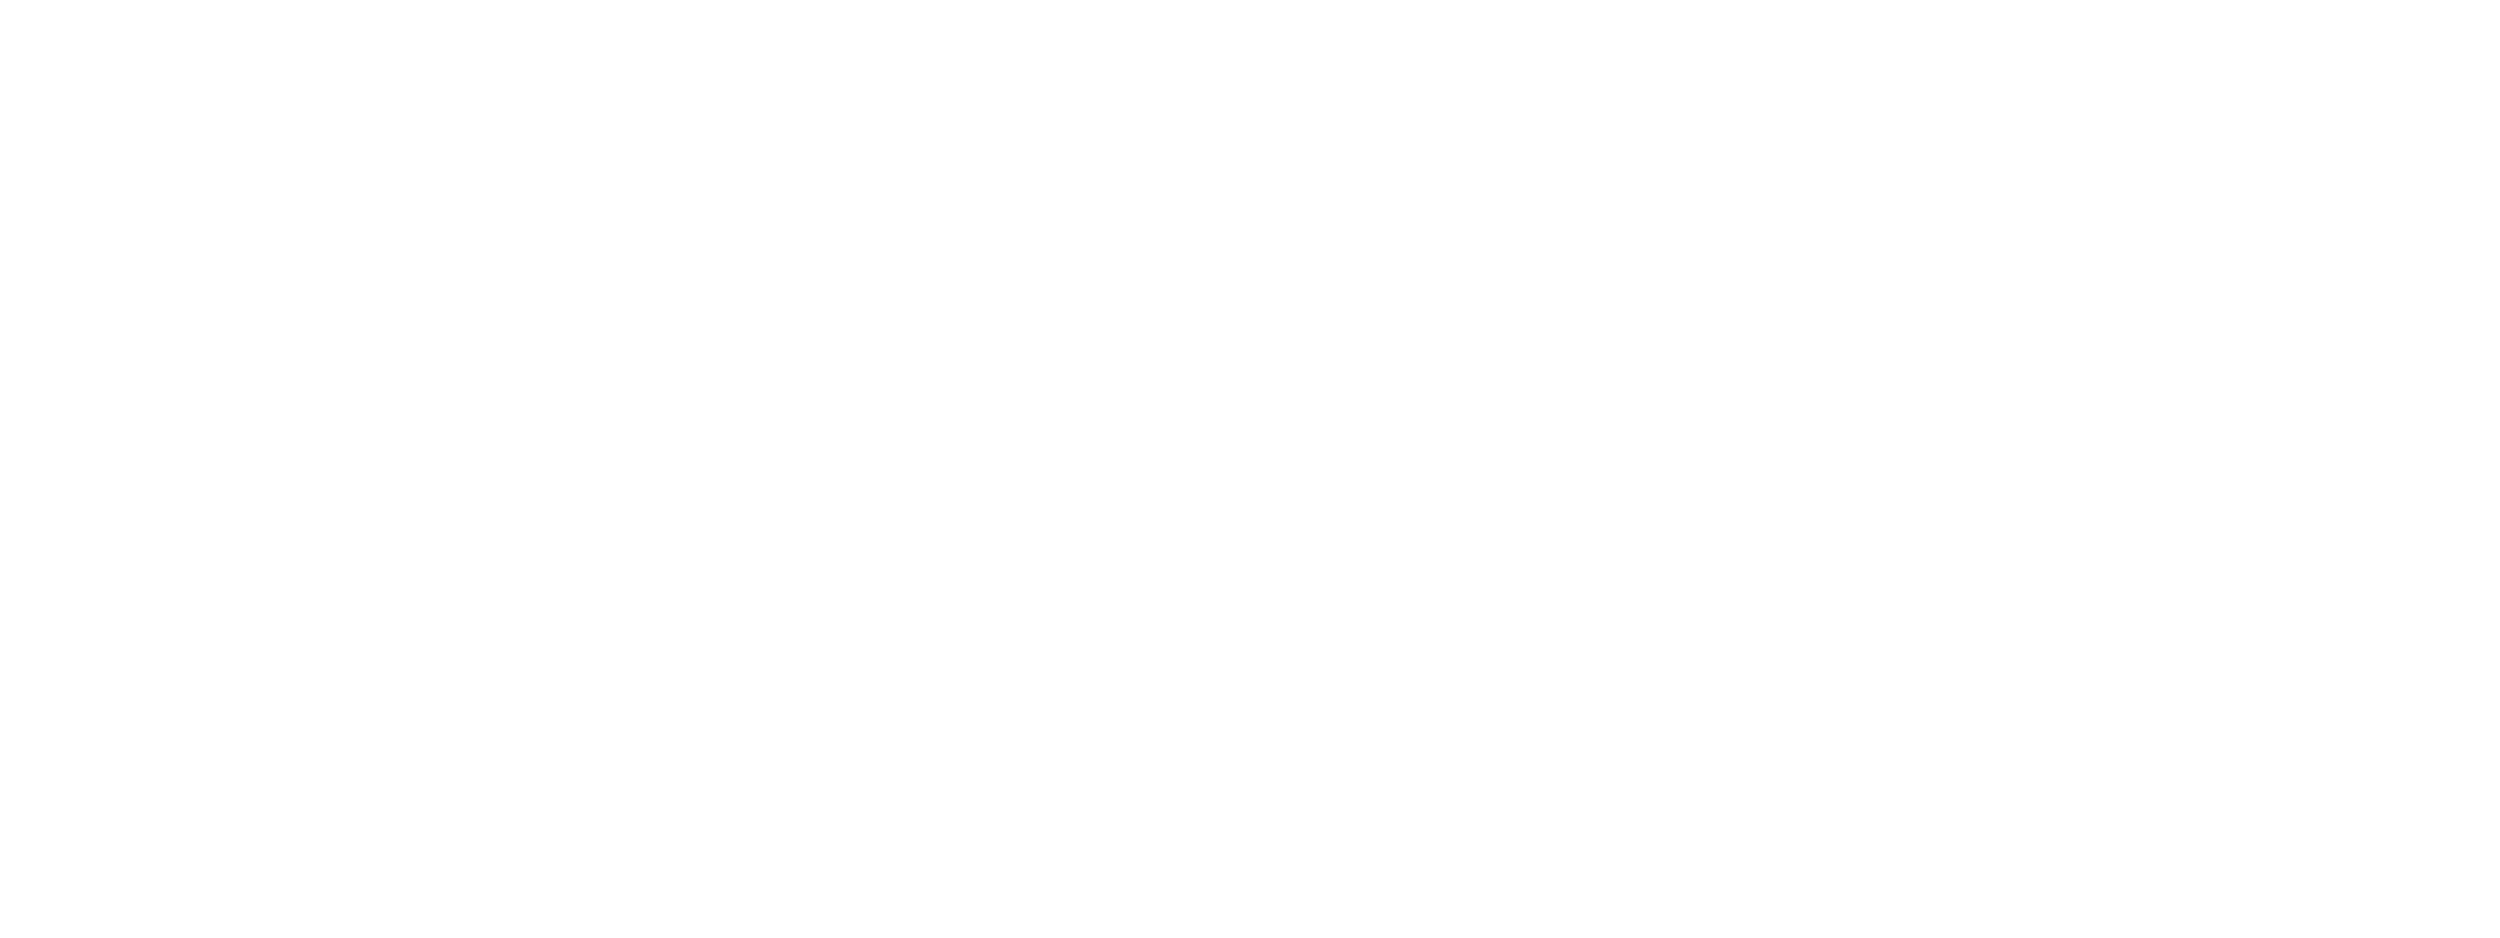 Revolution Design | High Quality and Affordable Website Design and Screen Printing